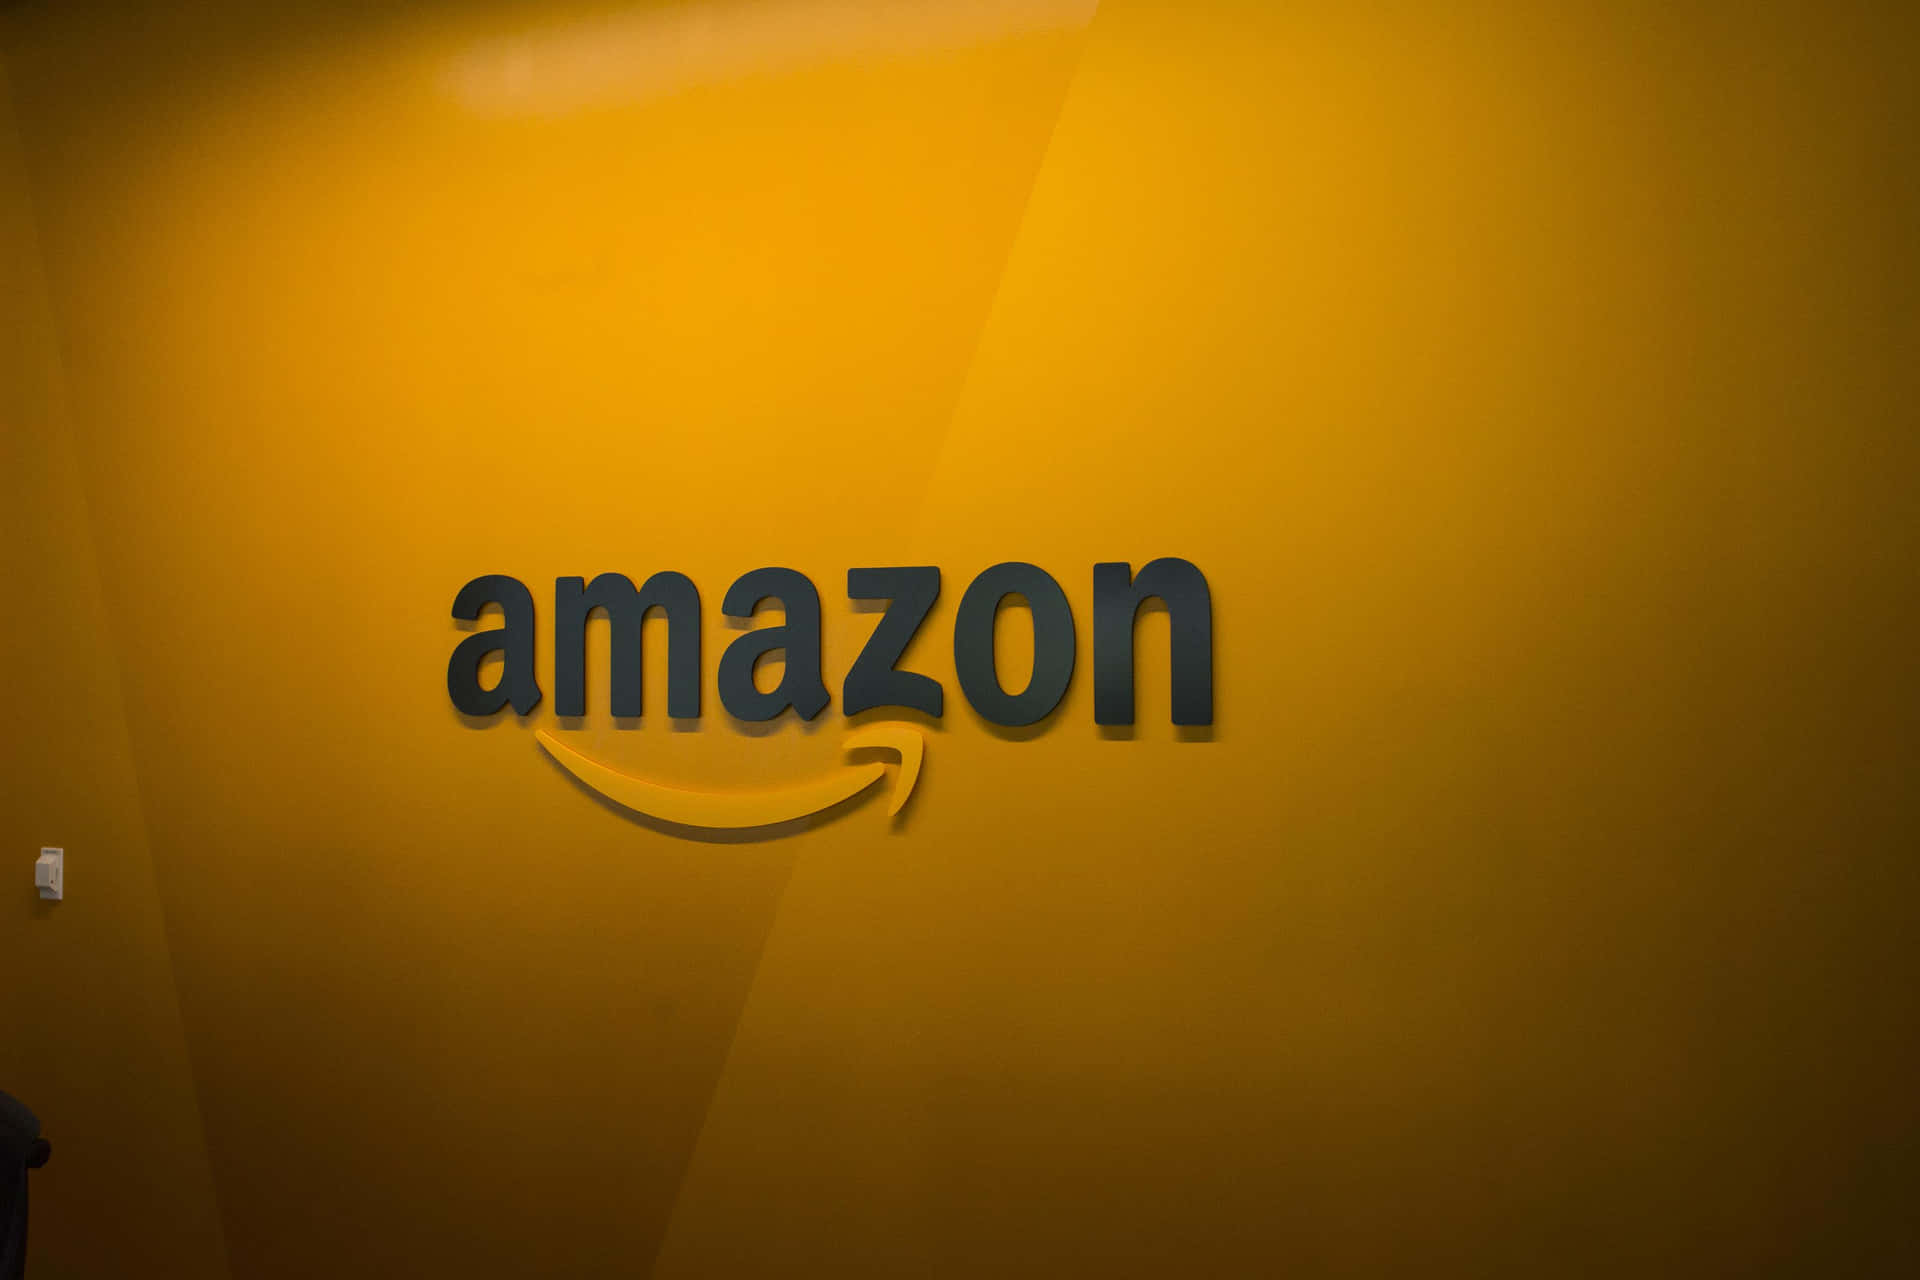 Customers browse Amazon's vast selection of products